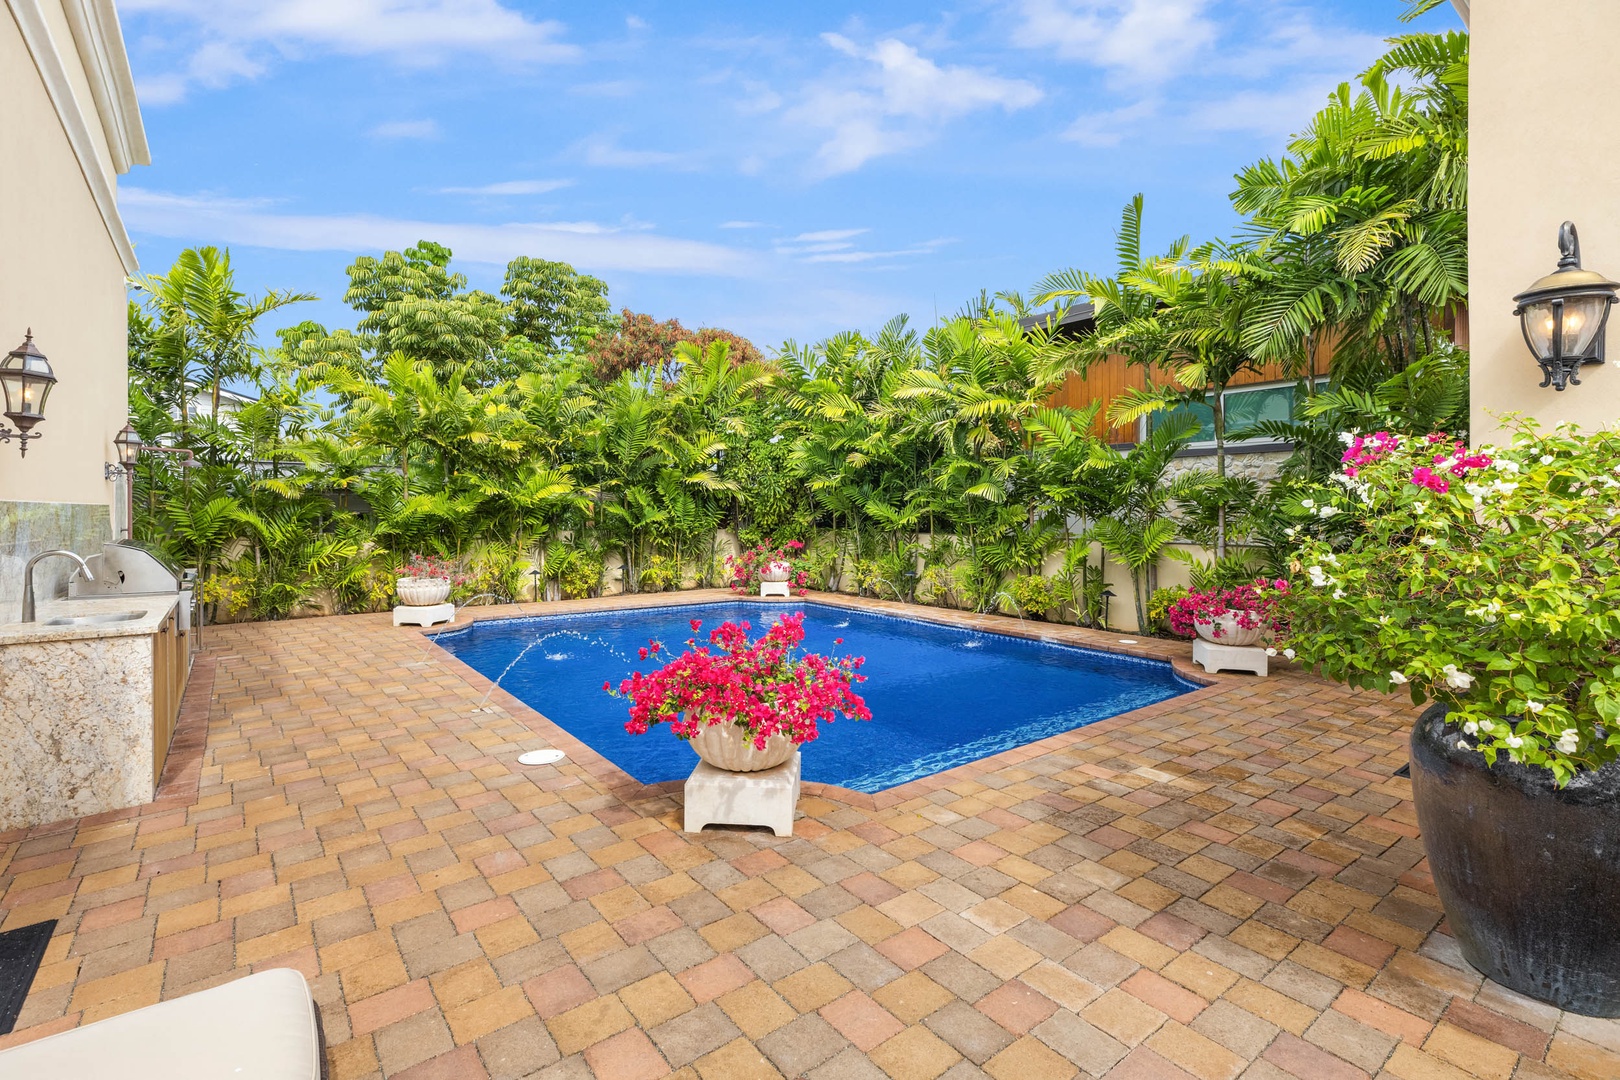 Honolulu Vacation Rentals, Royal Kahala Estate - Private pool flanked by vibrant tropical flowers.